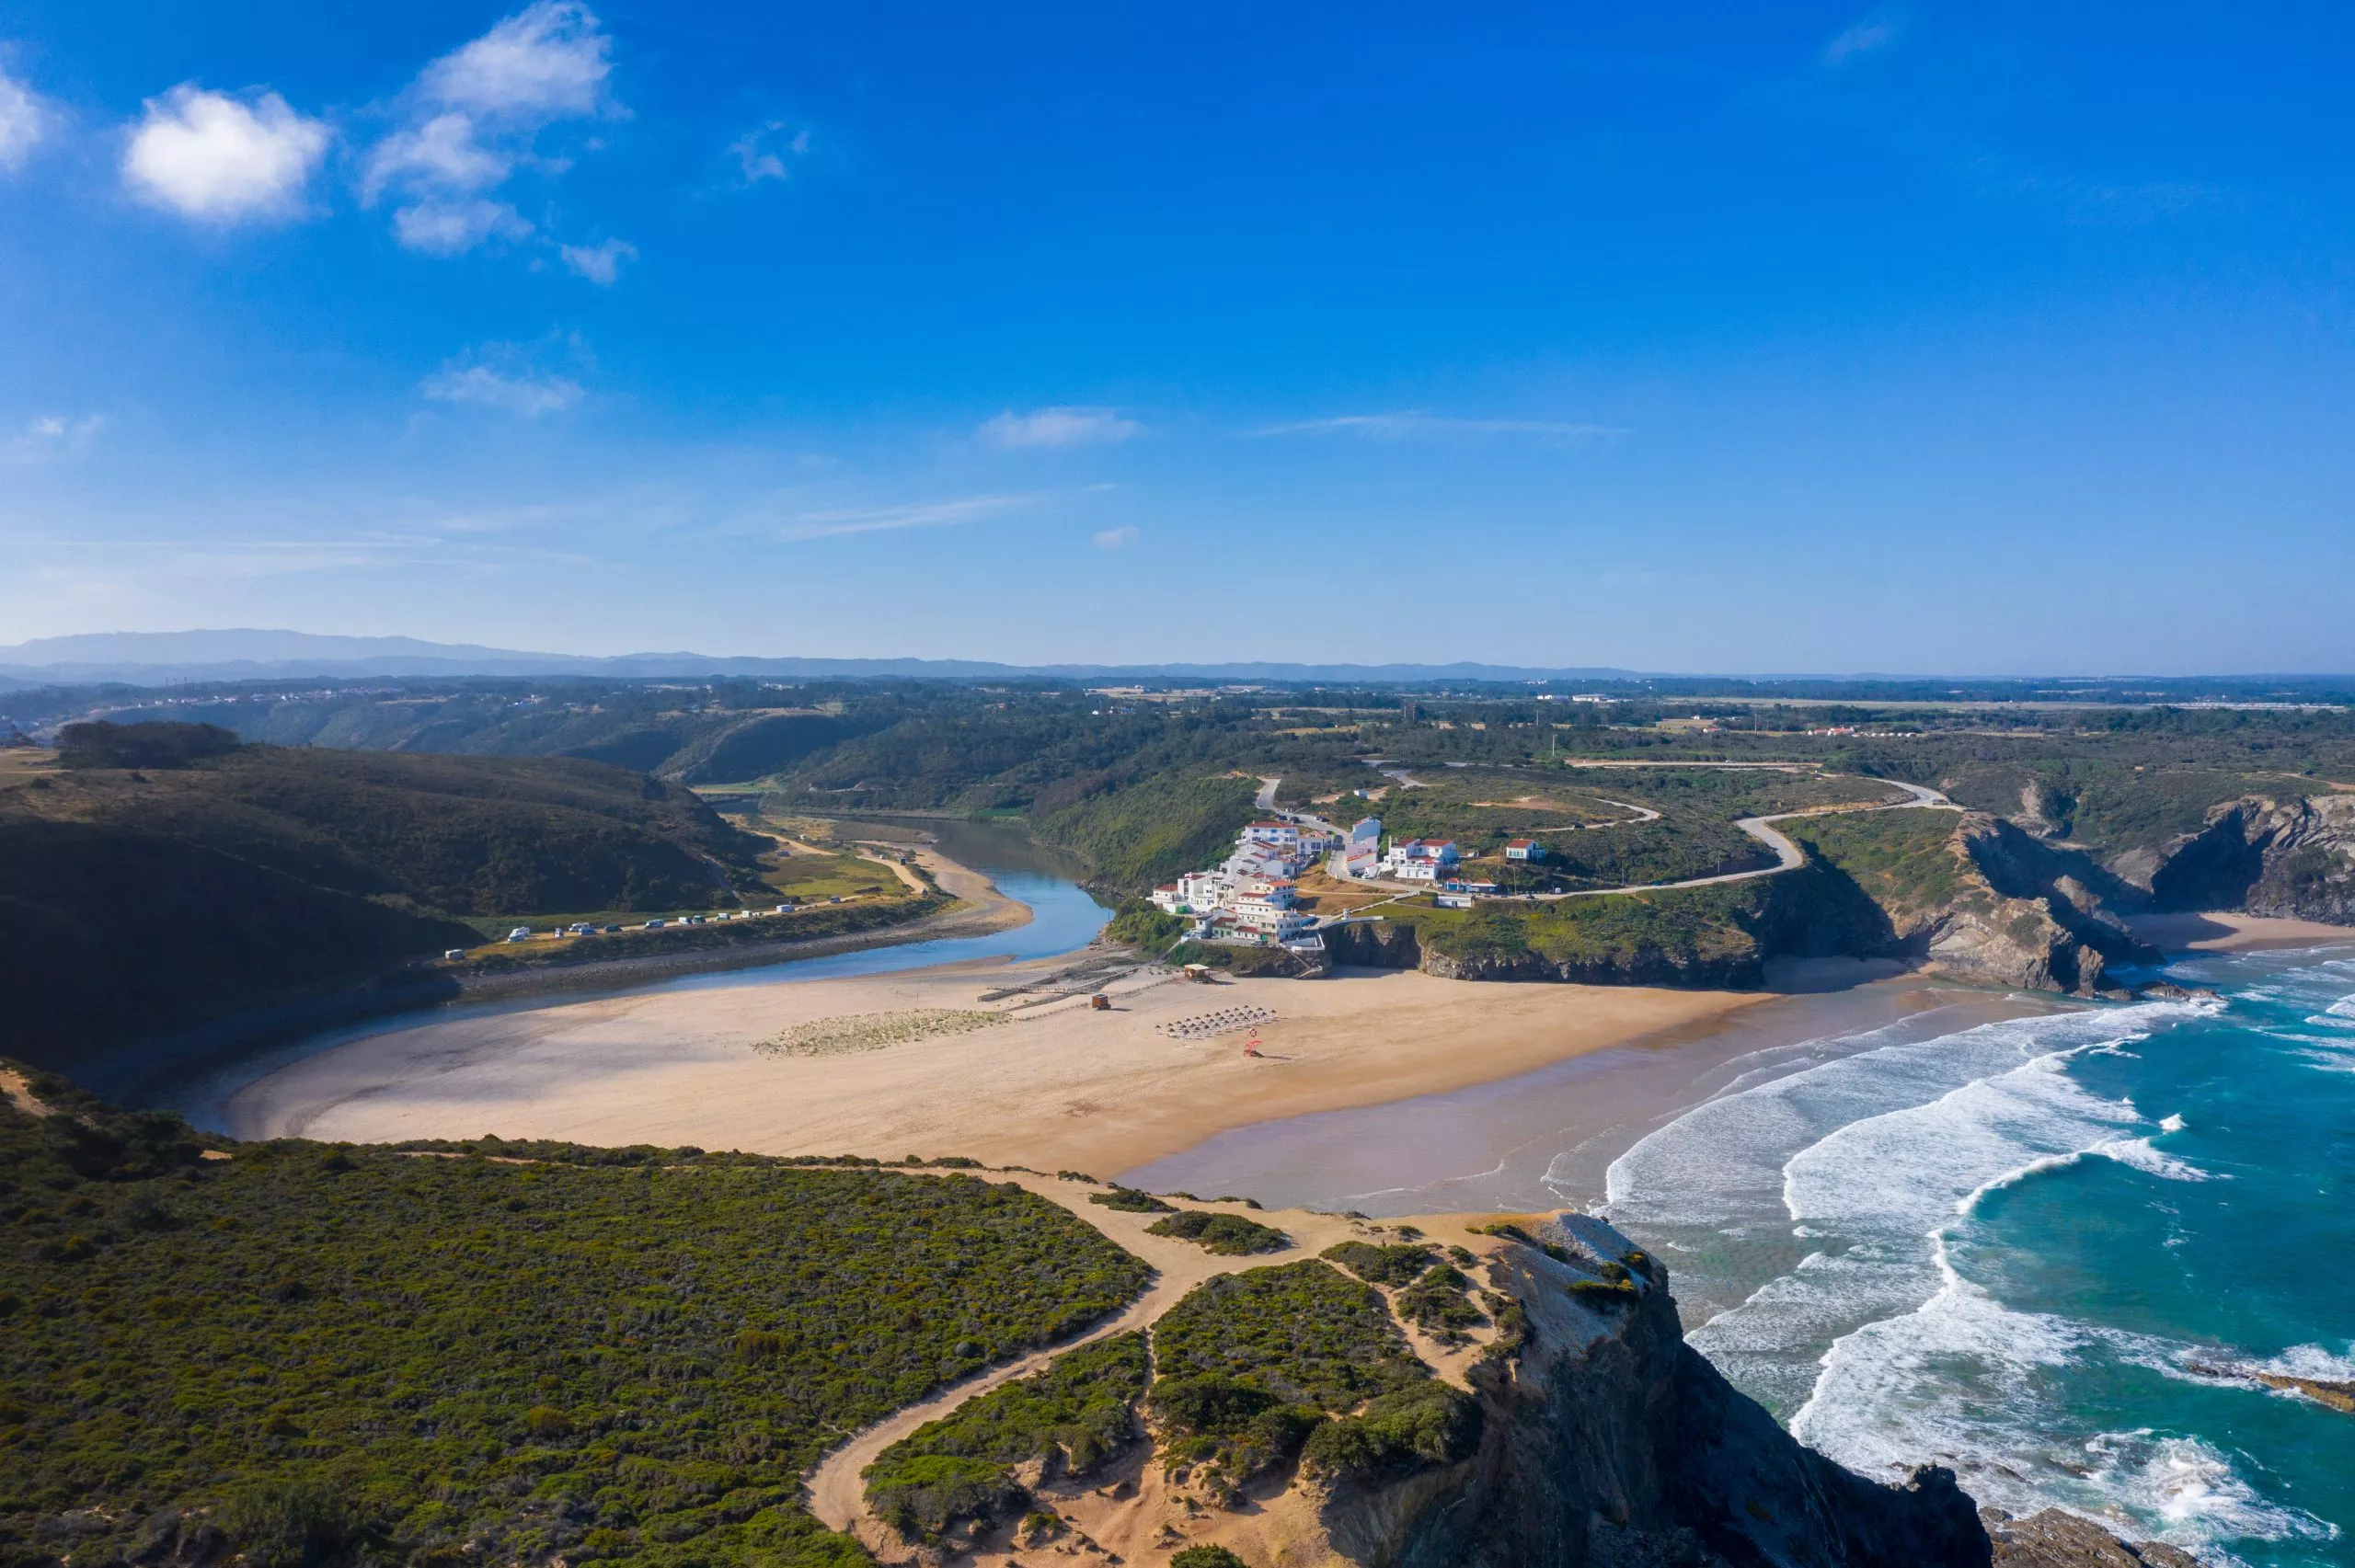 Odeceixe beach and river separates Alentejo from the Algarve. Natural Park of Southwest Alentejo and Costa Vicentina. Travel holidays in Aljezur, Portugal.